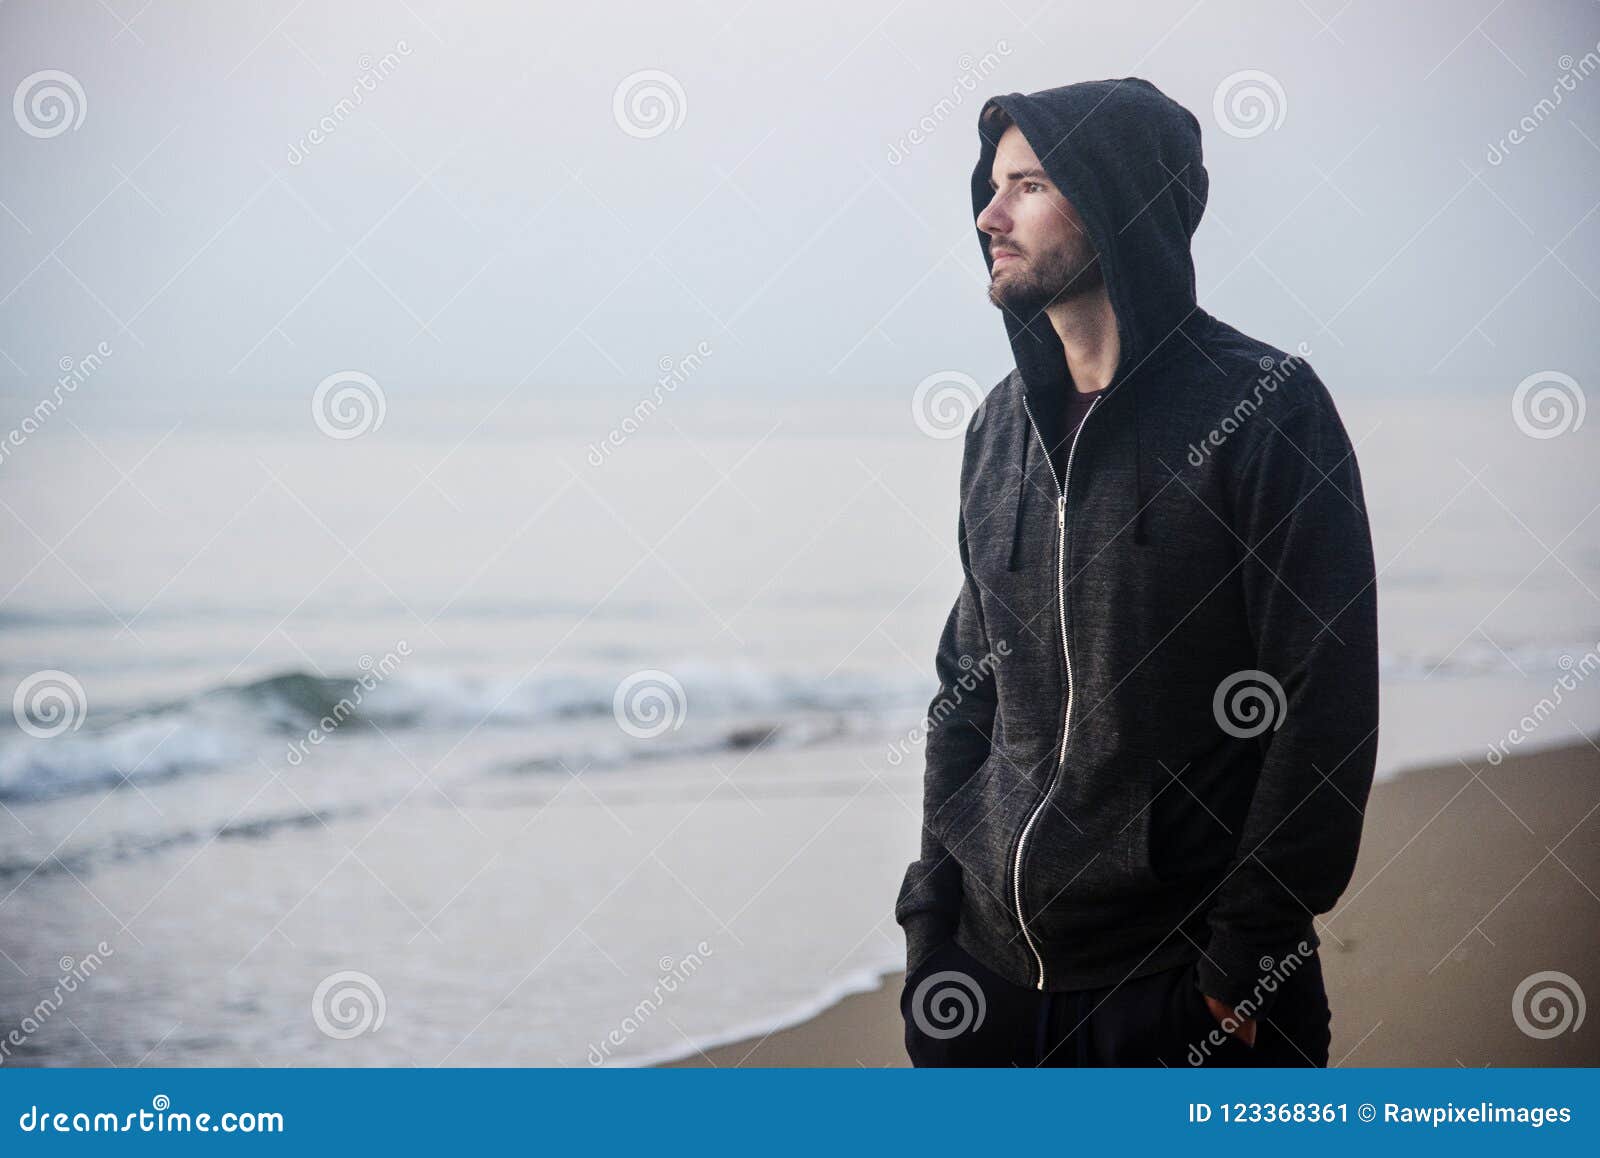 man walking in solitude at the beach